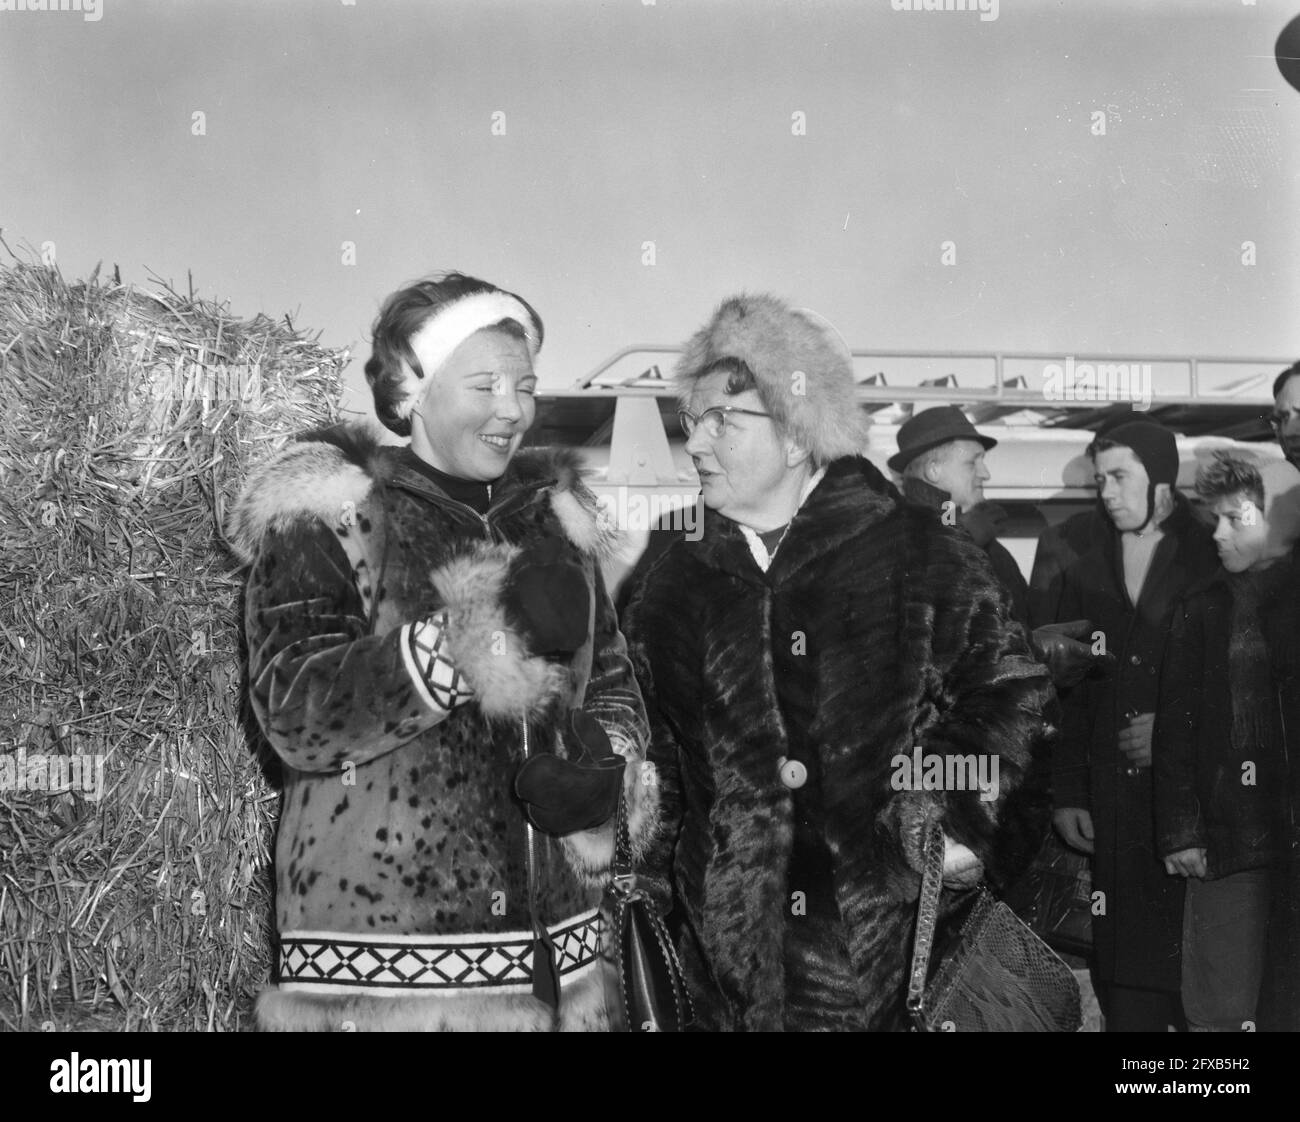 Elfstedentocht 1963. Queen Juliana and Princess Beatrix at the finish in Leeuwarden, 18 January 1963, royal family, skating, sports, spectators, The Netherlands, 20th century press agency photo, news to remember, documentary, historic photography 1945-1990, visual stories, human history of the Twentieth Century, capturing moments in time Stock Photo